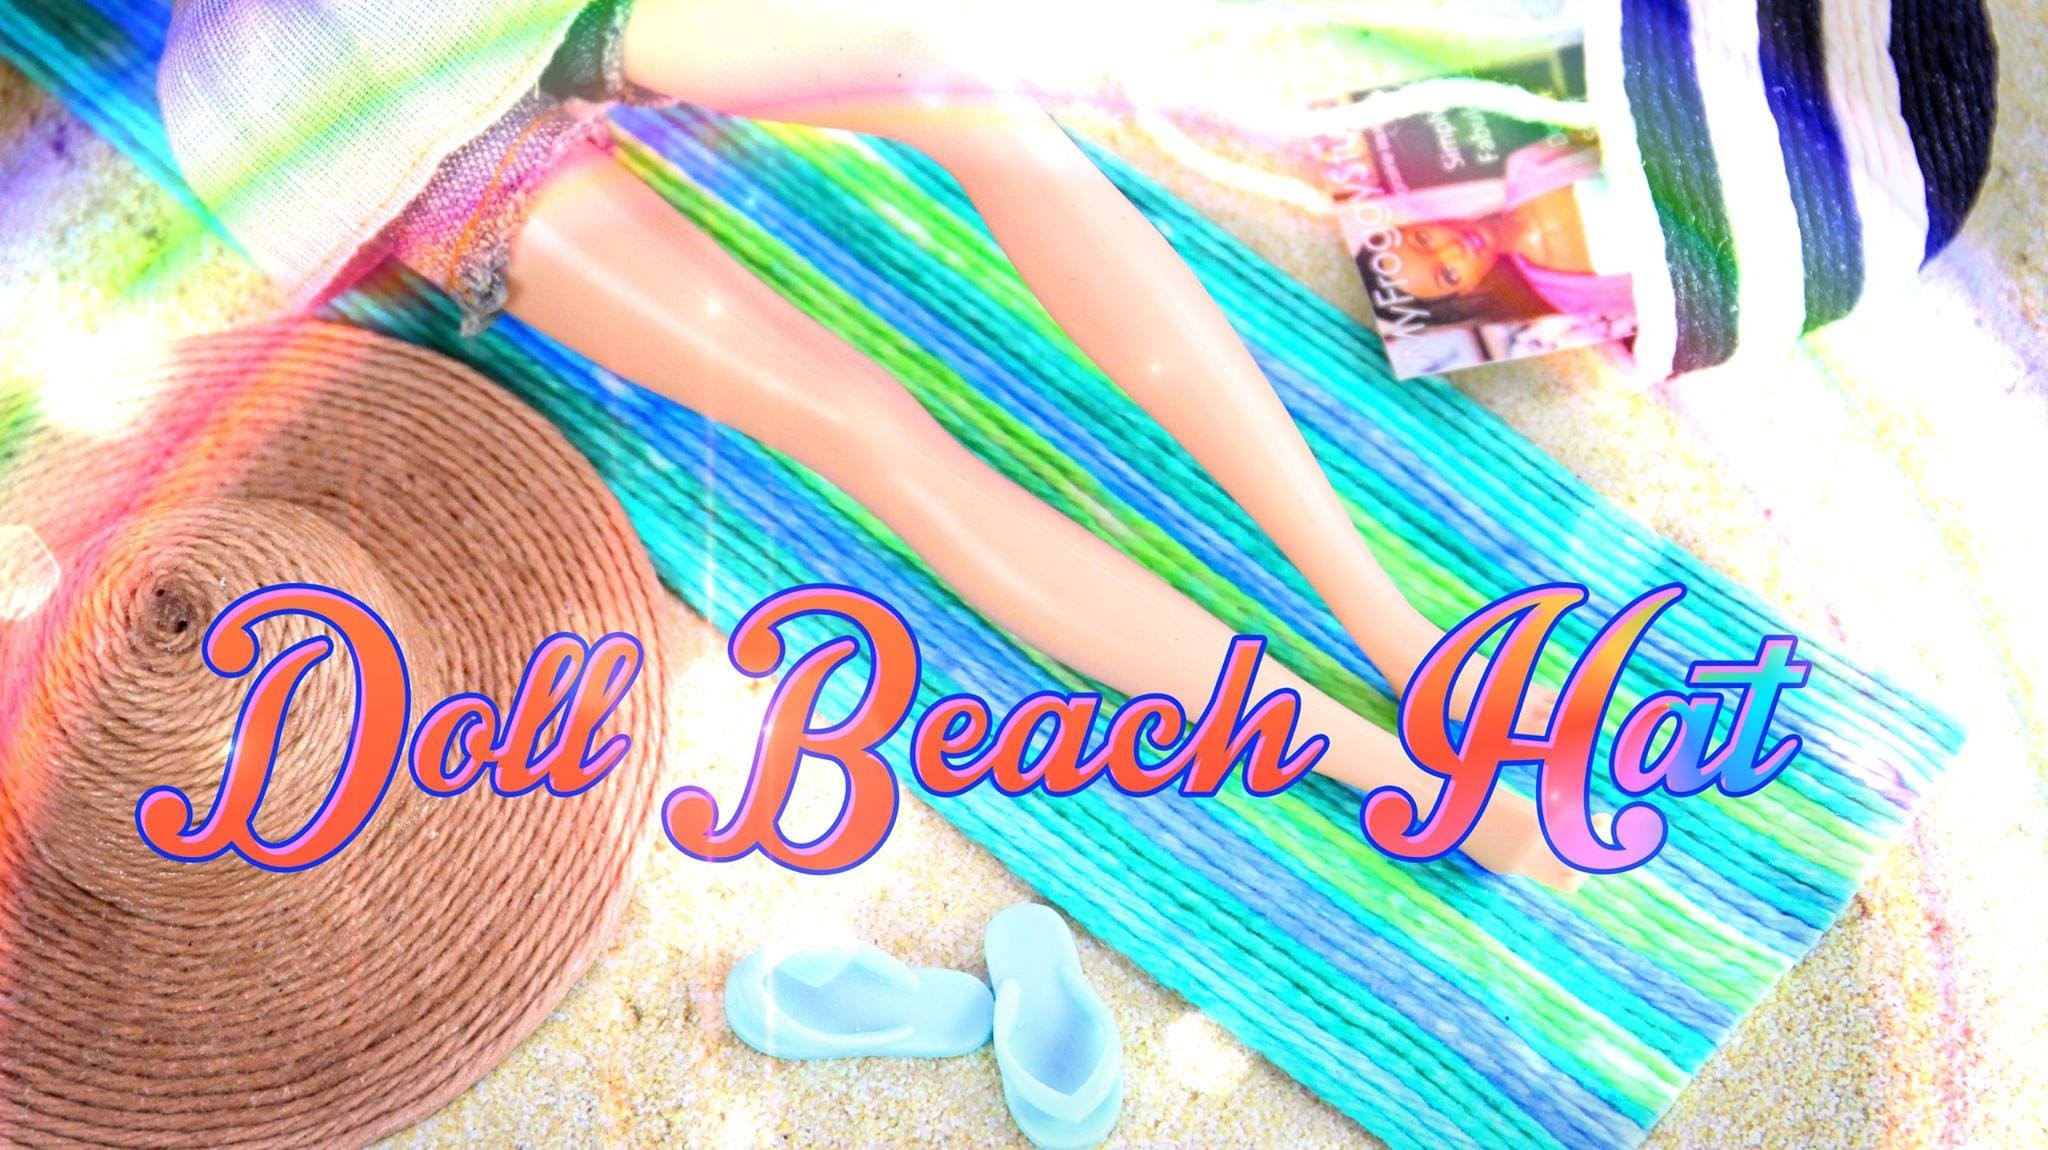 How to Make a Doll Beach Hat with Accessories - Doll Crafts